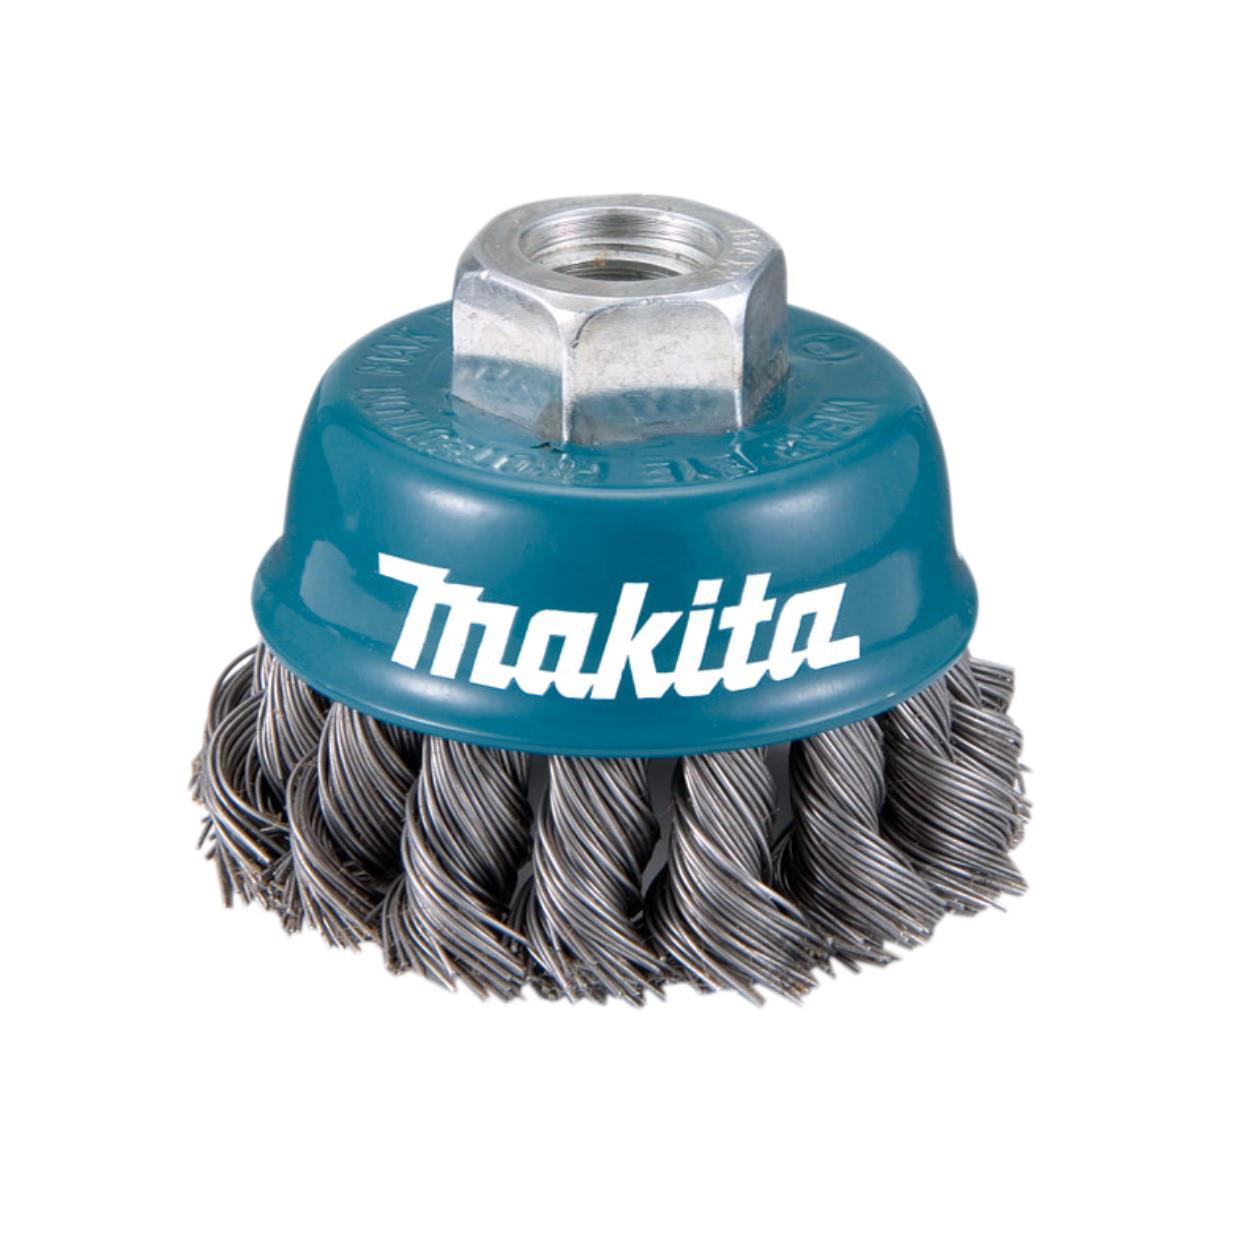 Makita D-24119 Knotted Wire Cup Brush; For Angle Grinder; 60mm Diameter; M14 x 2 Spindle Thread